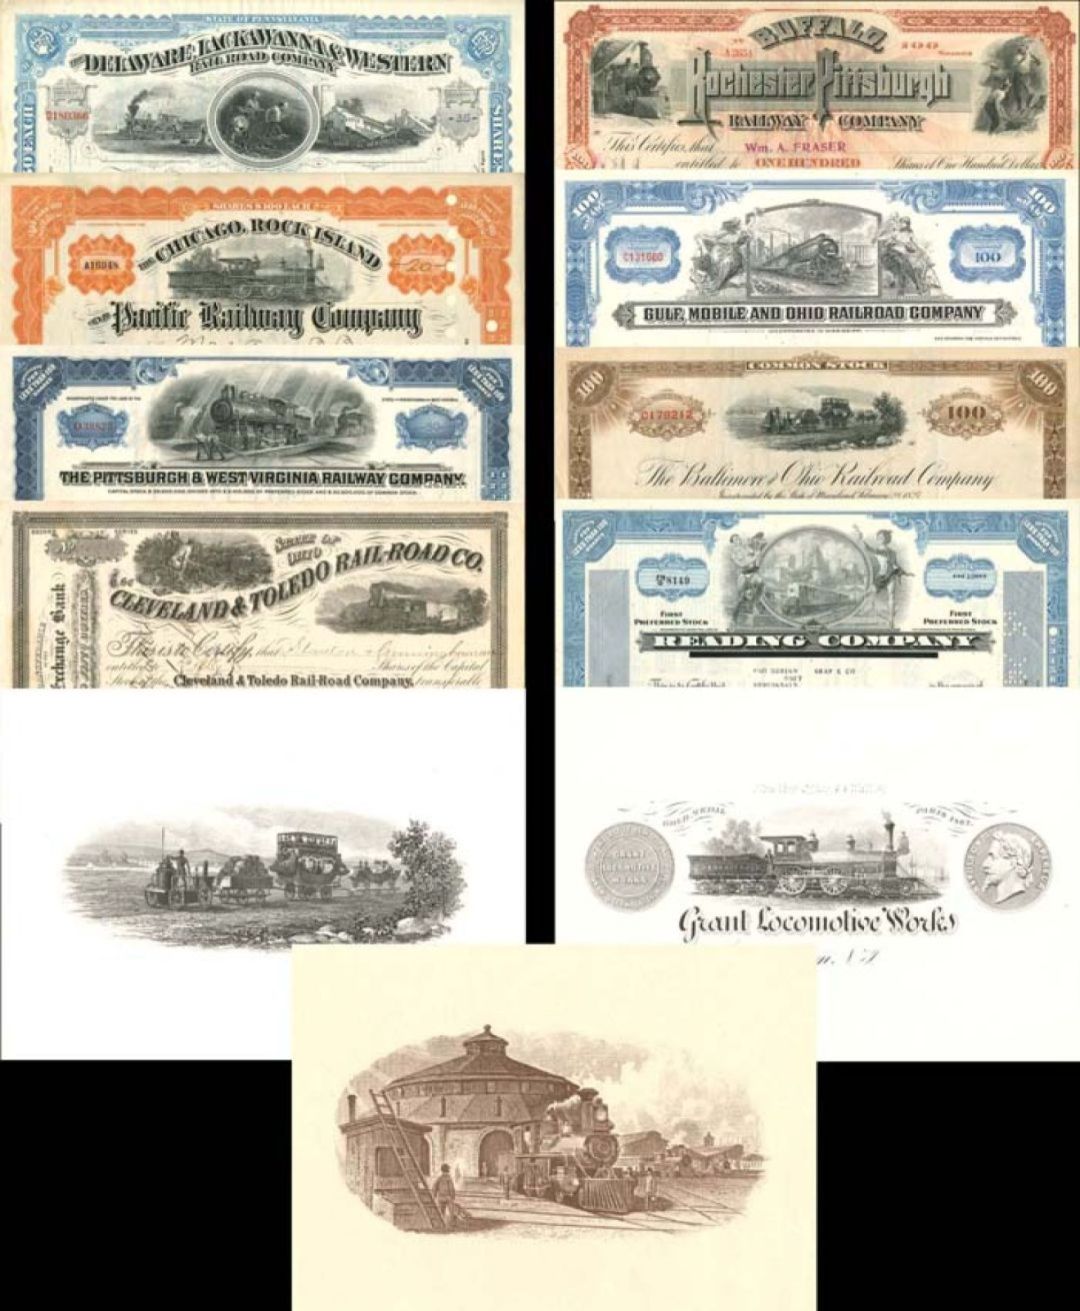 Collection of 8 Railroad Stocks and 3 Prints - 1860's-1950's dated Group of 8 Stocks and 3 Prints - Great Collection